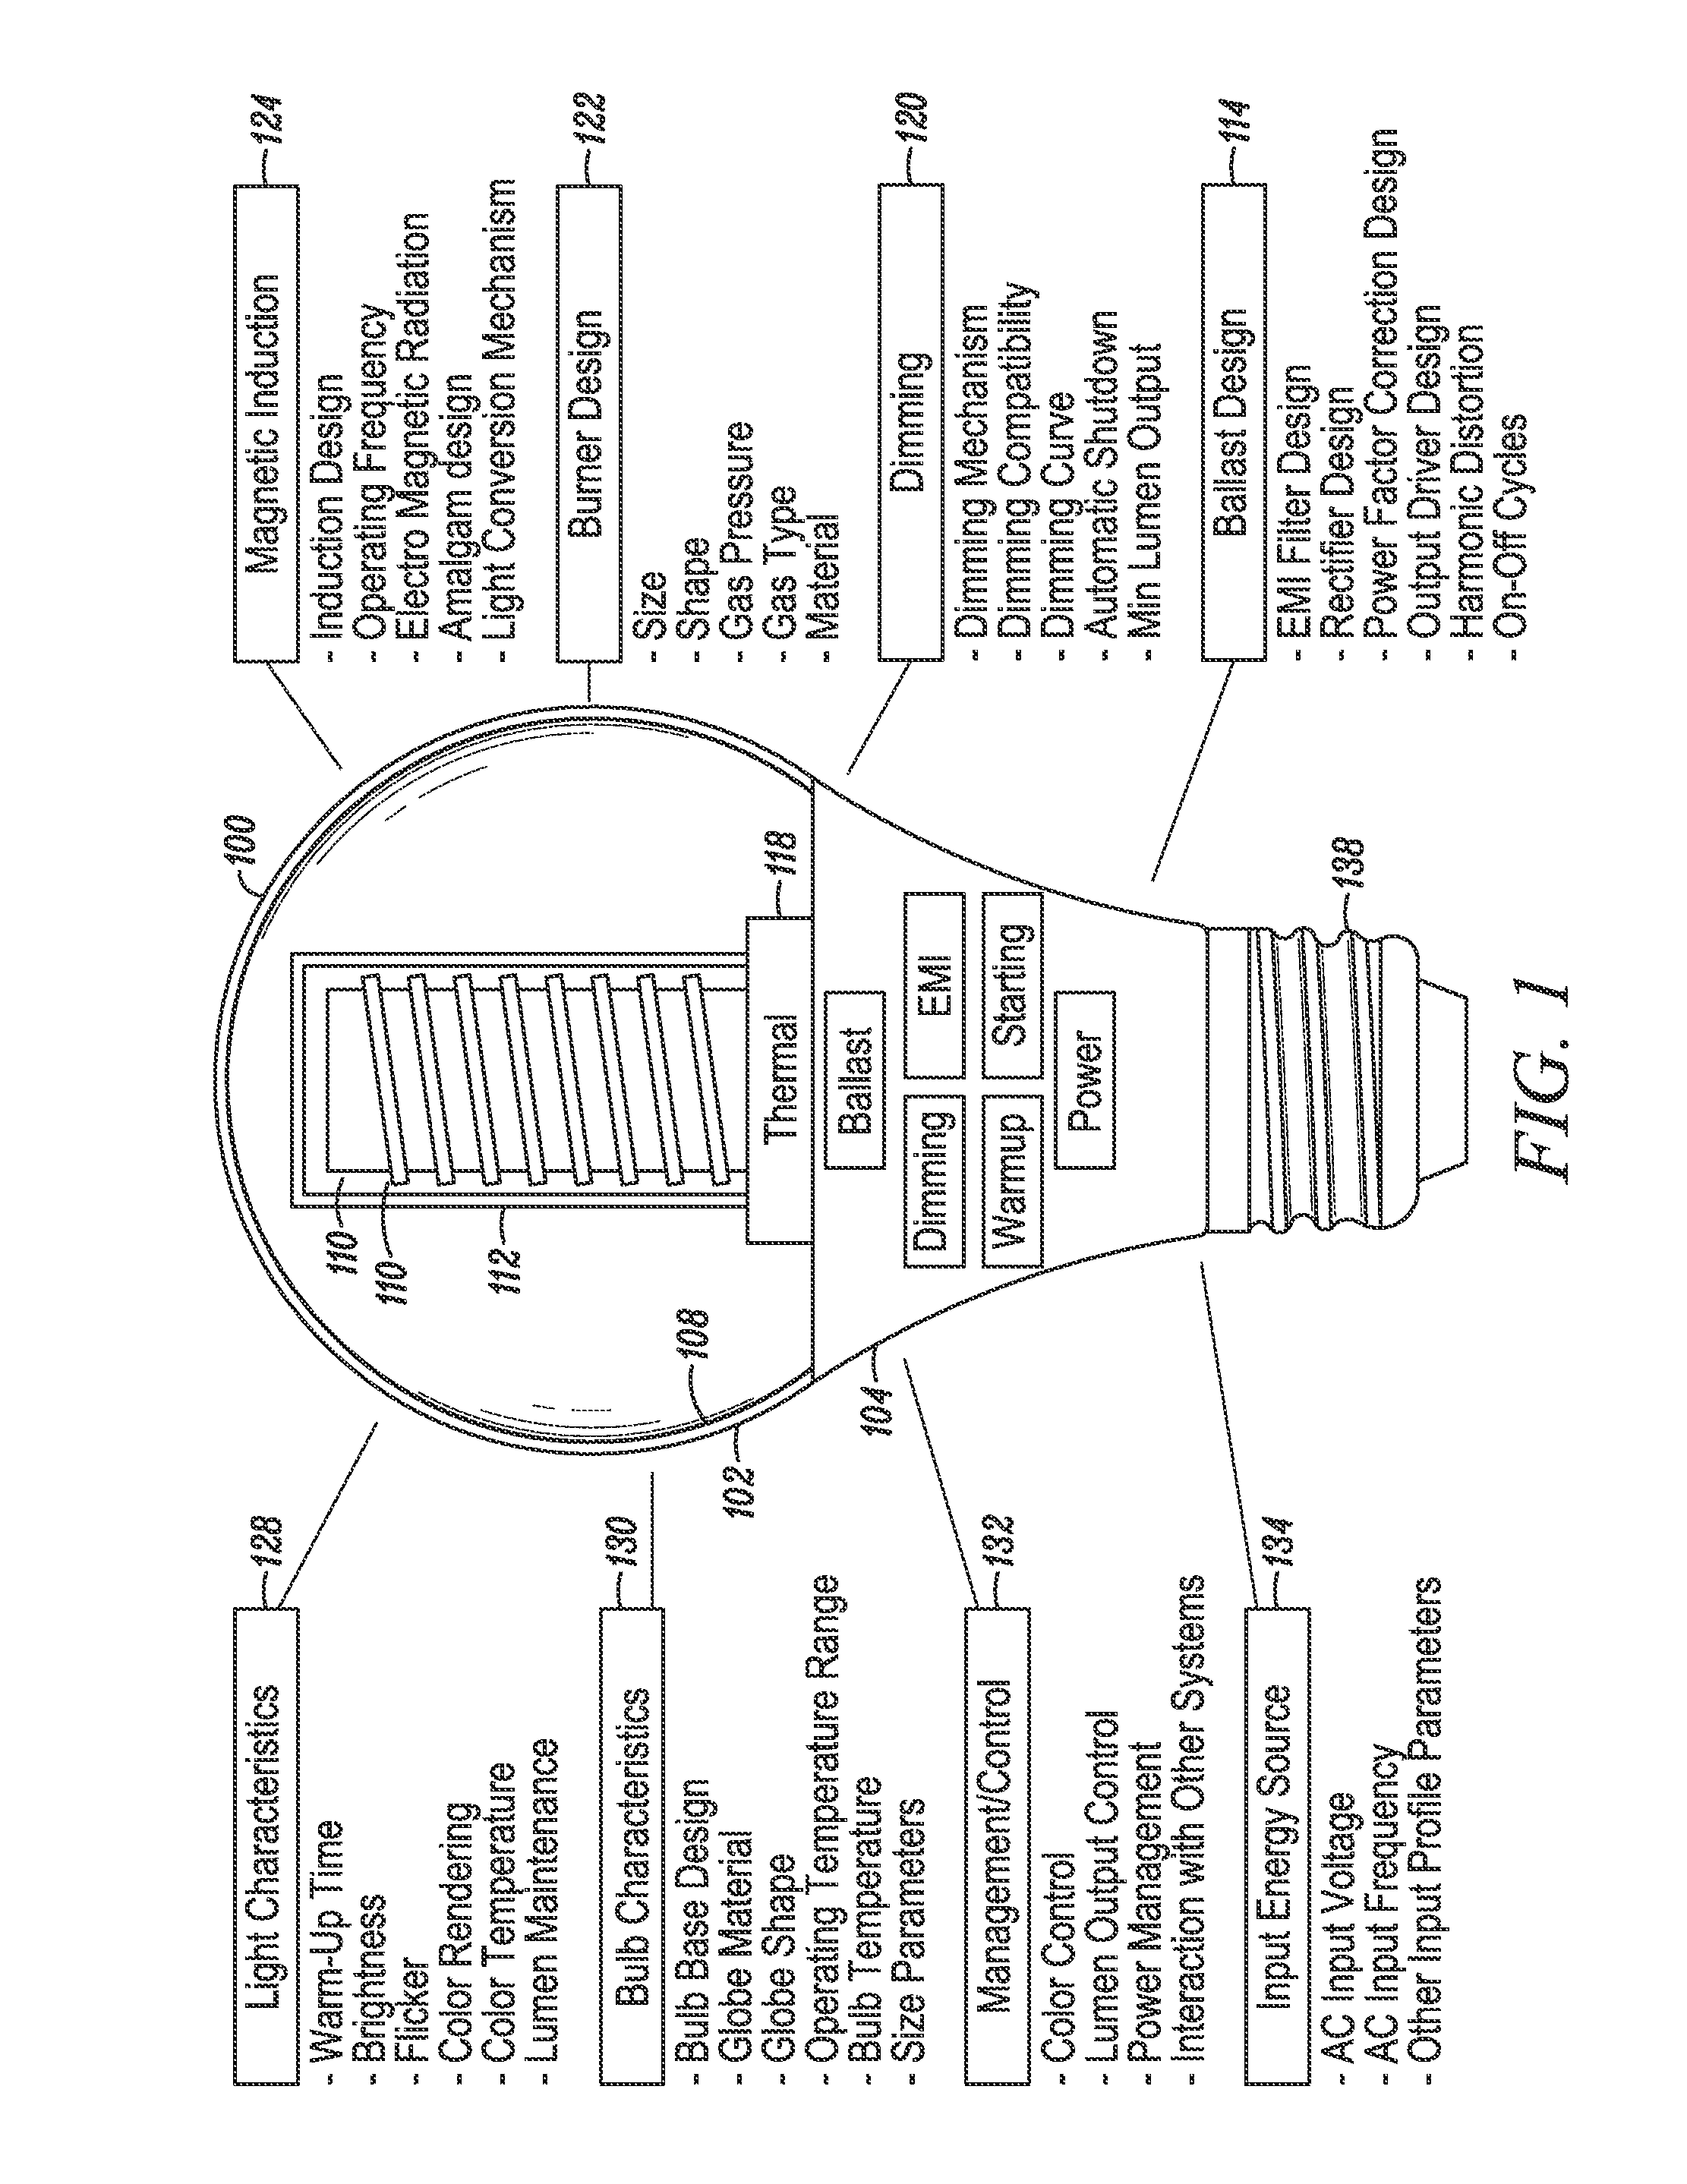 Induction RF fluorescent lamp with load control for external dimming device